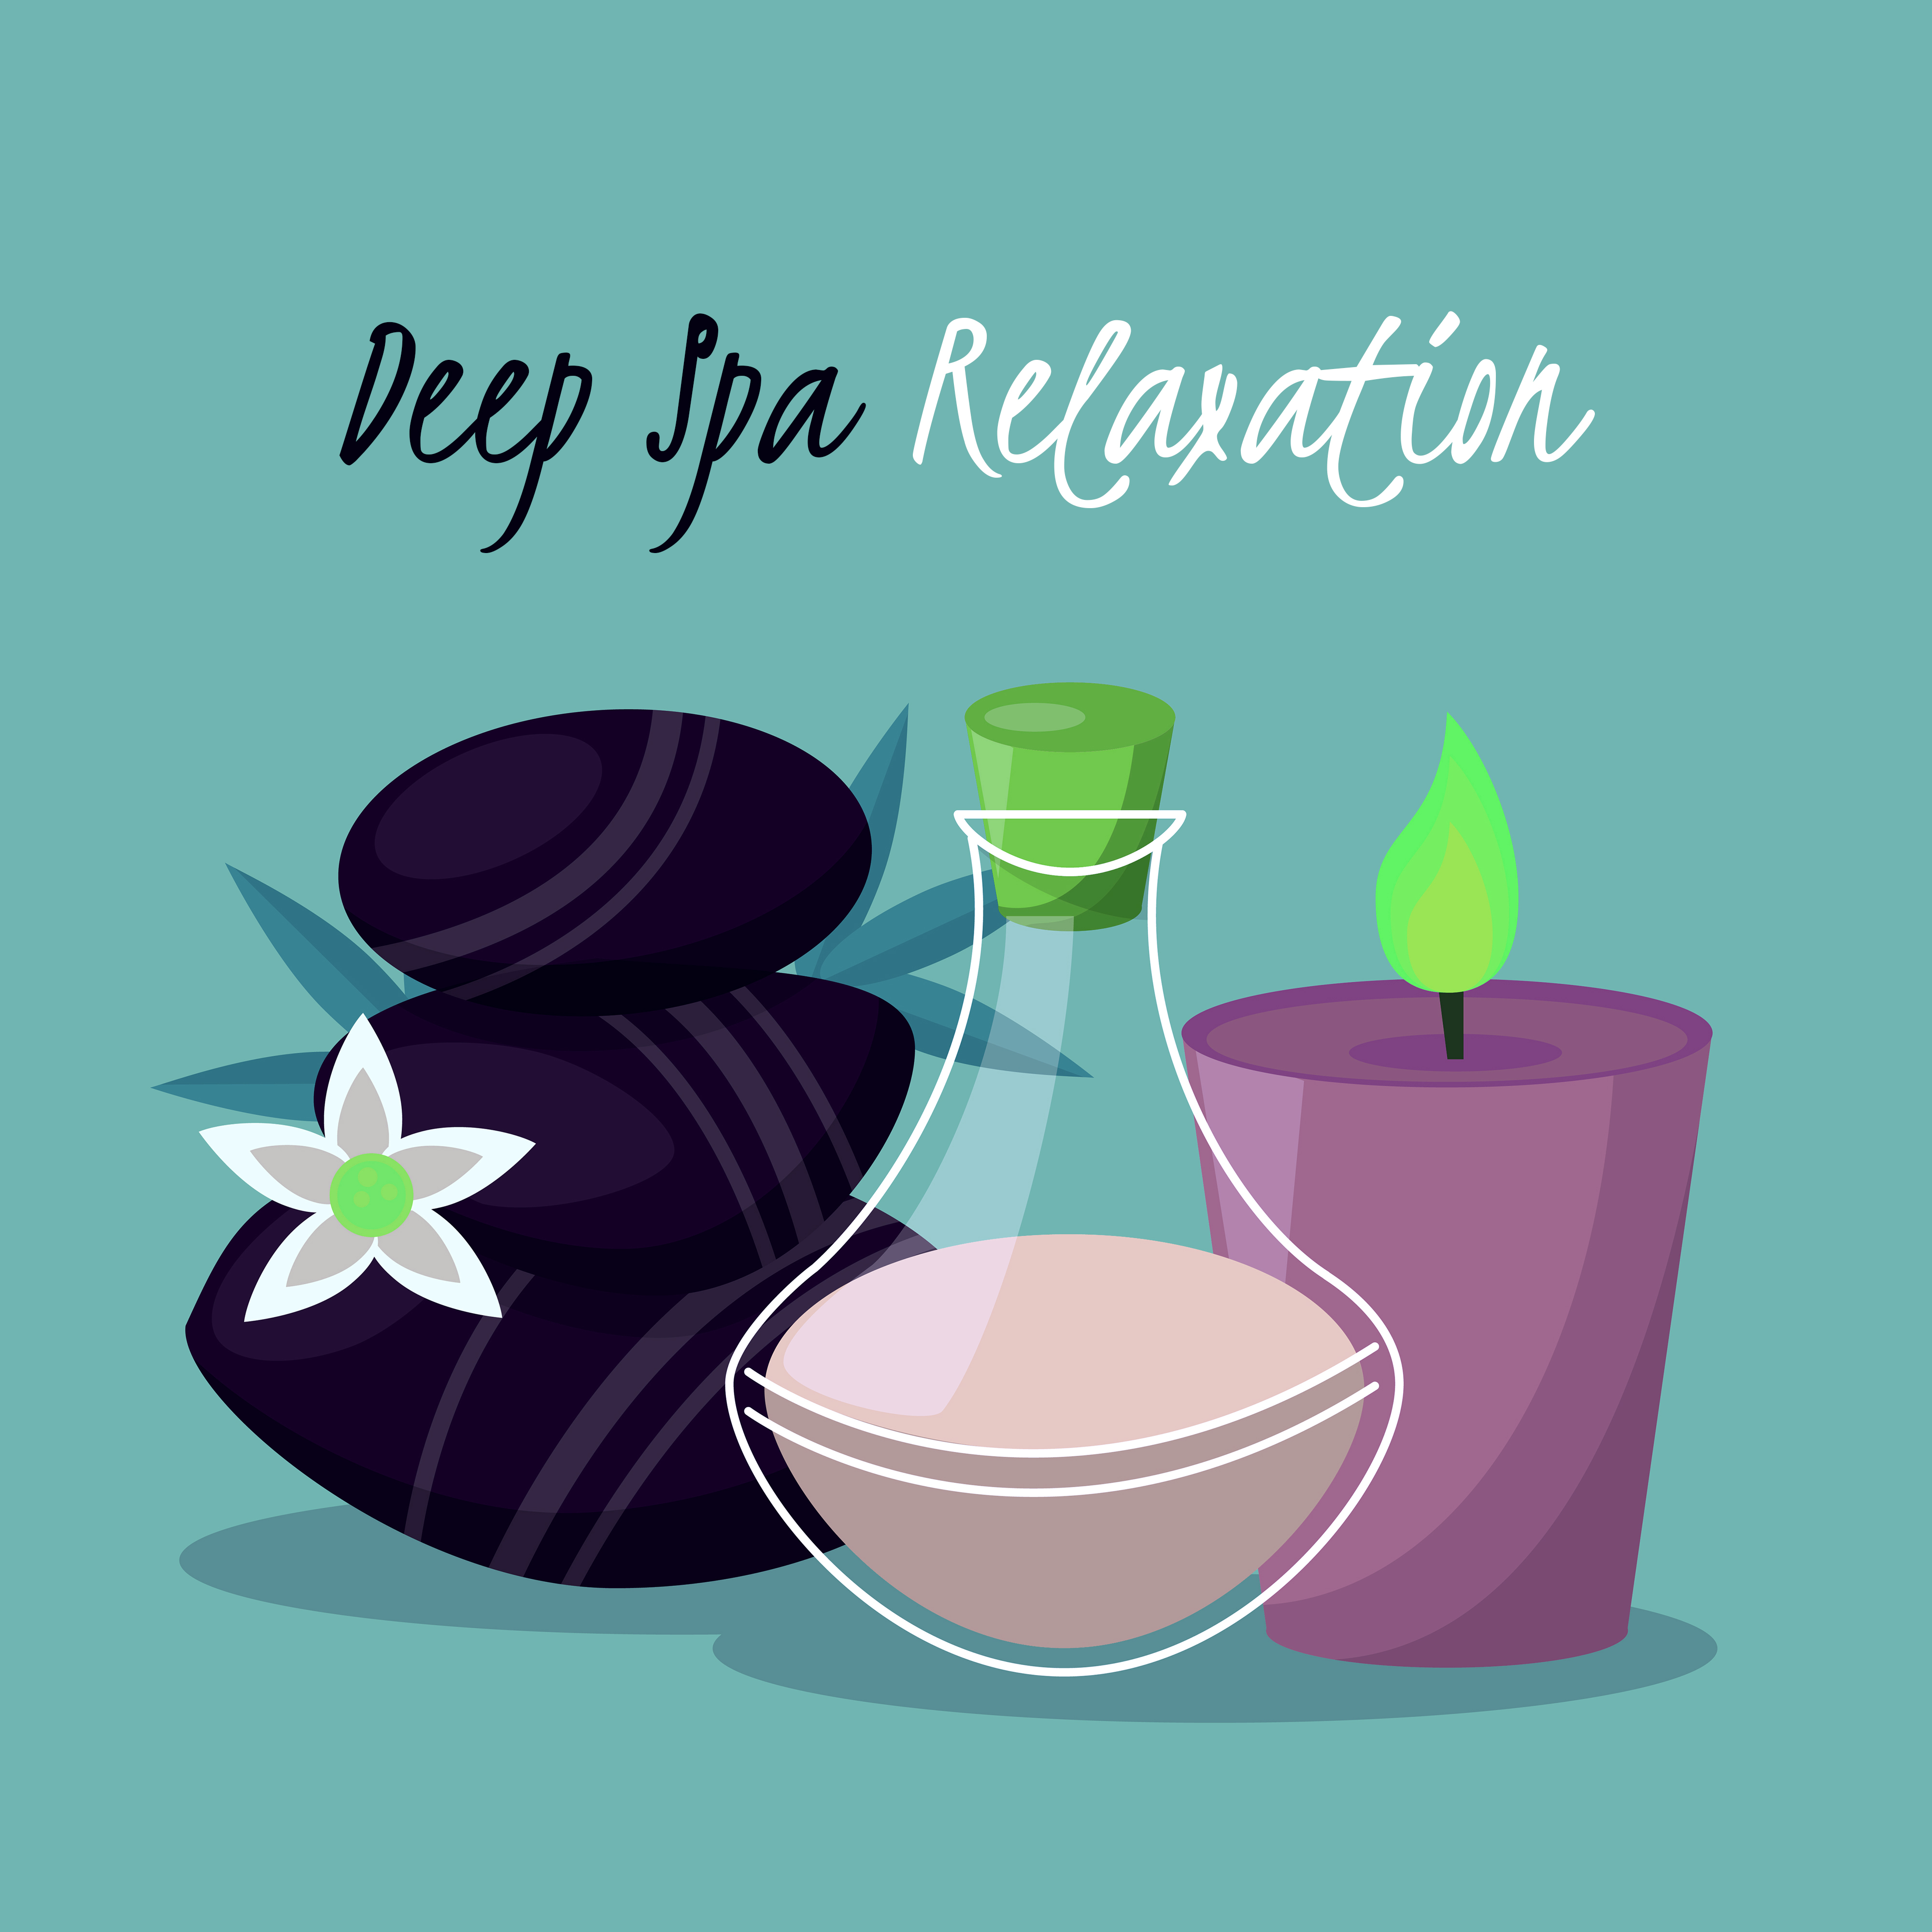 Deep Spa Relaxation